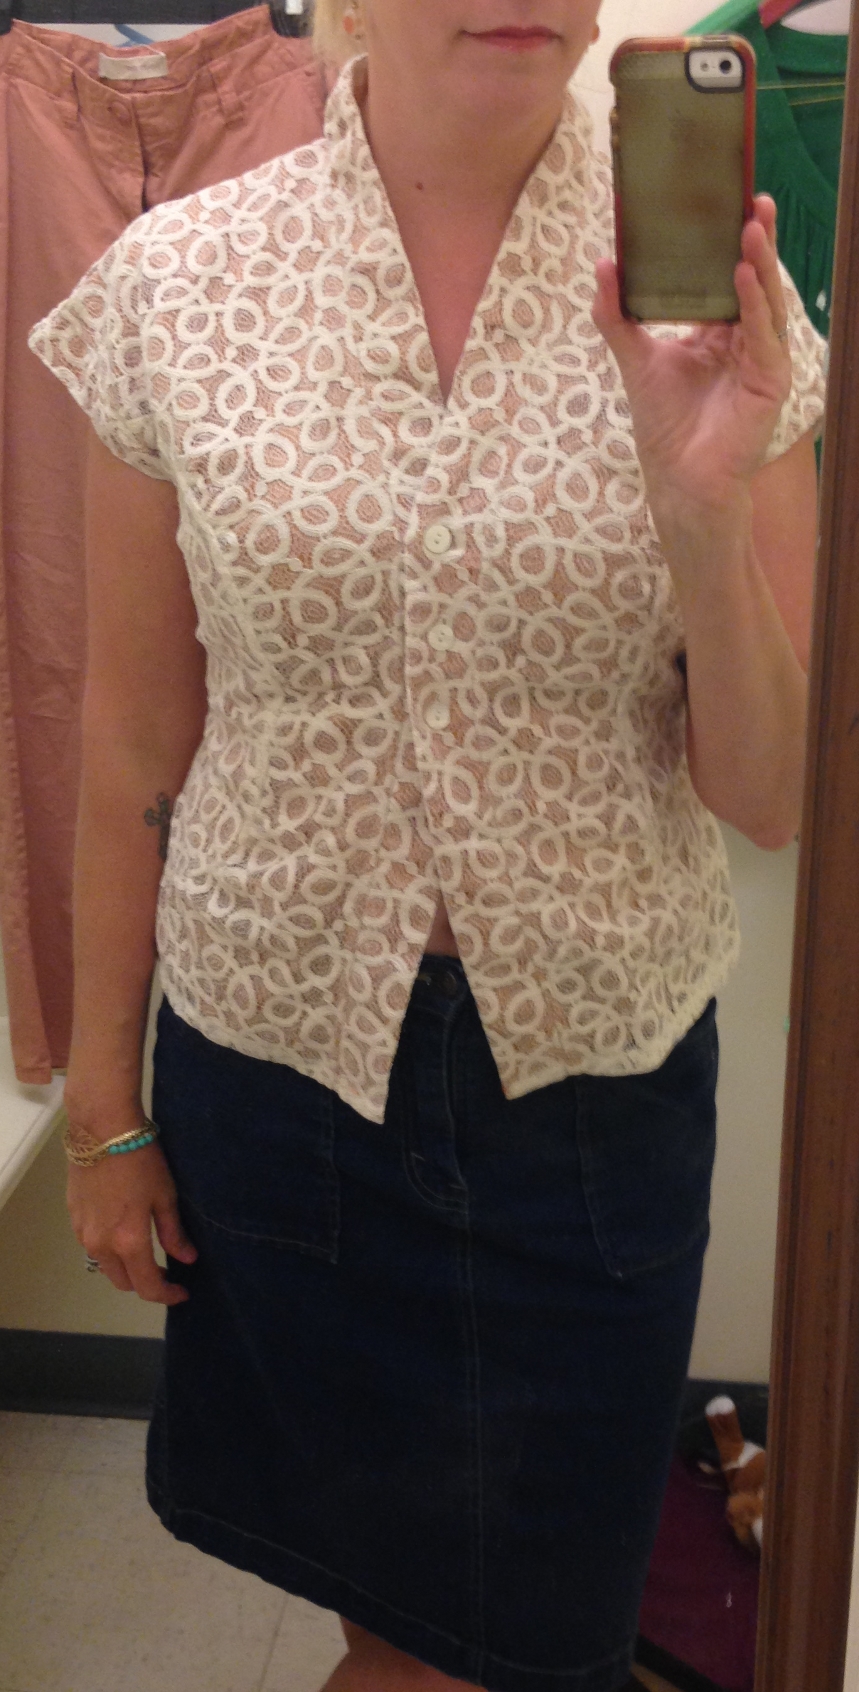 But my favourite find was this gorgeous silk top...